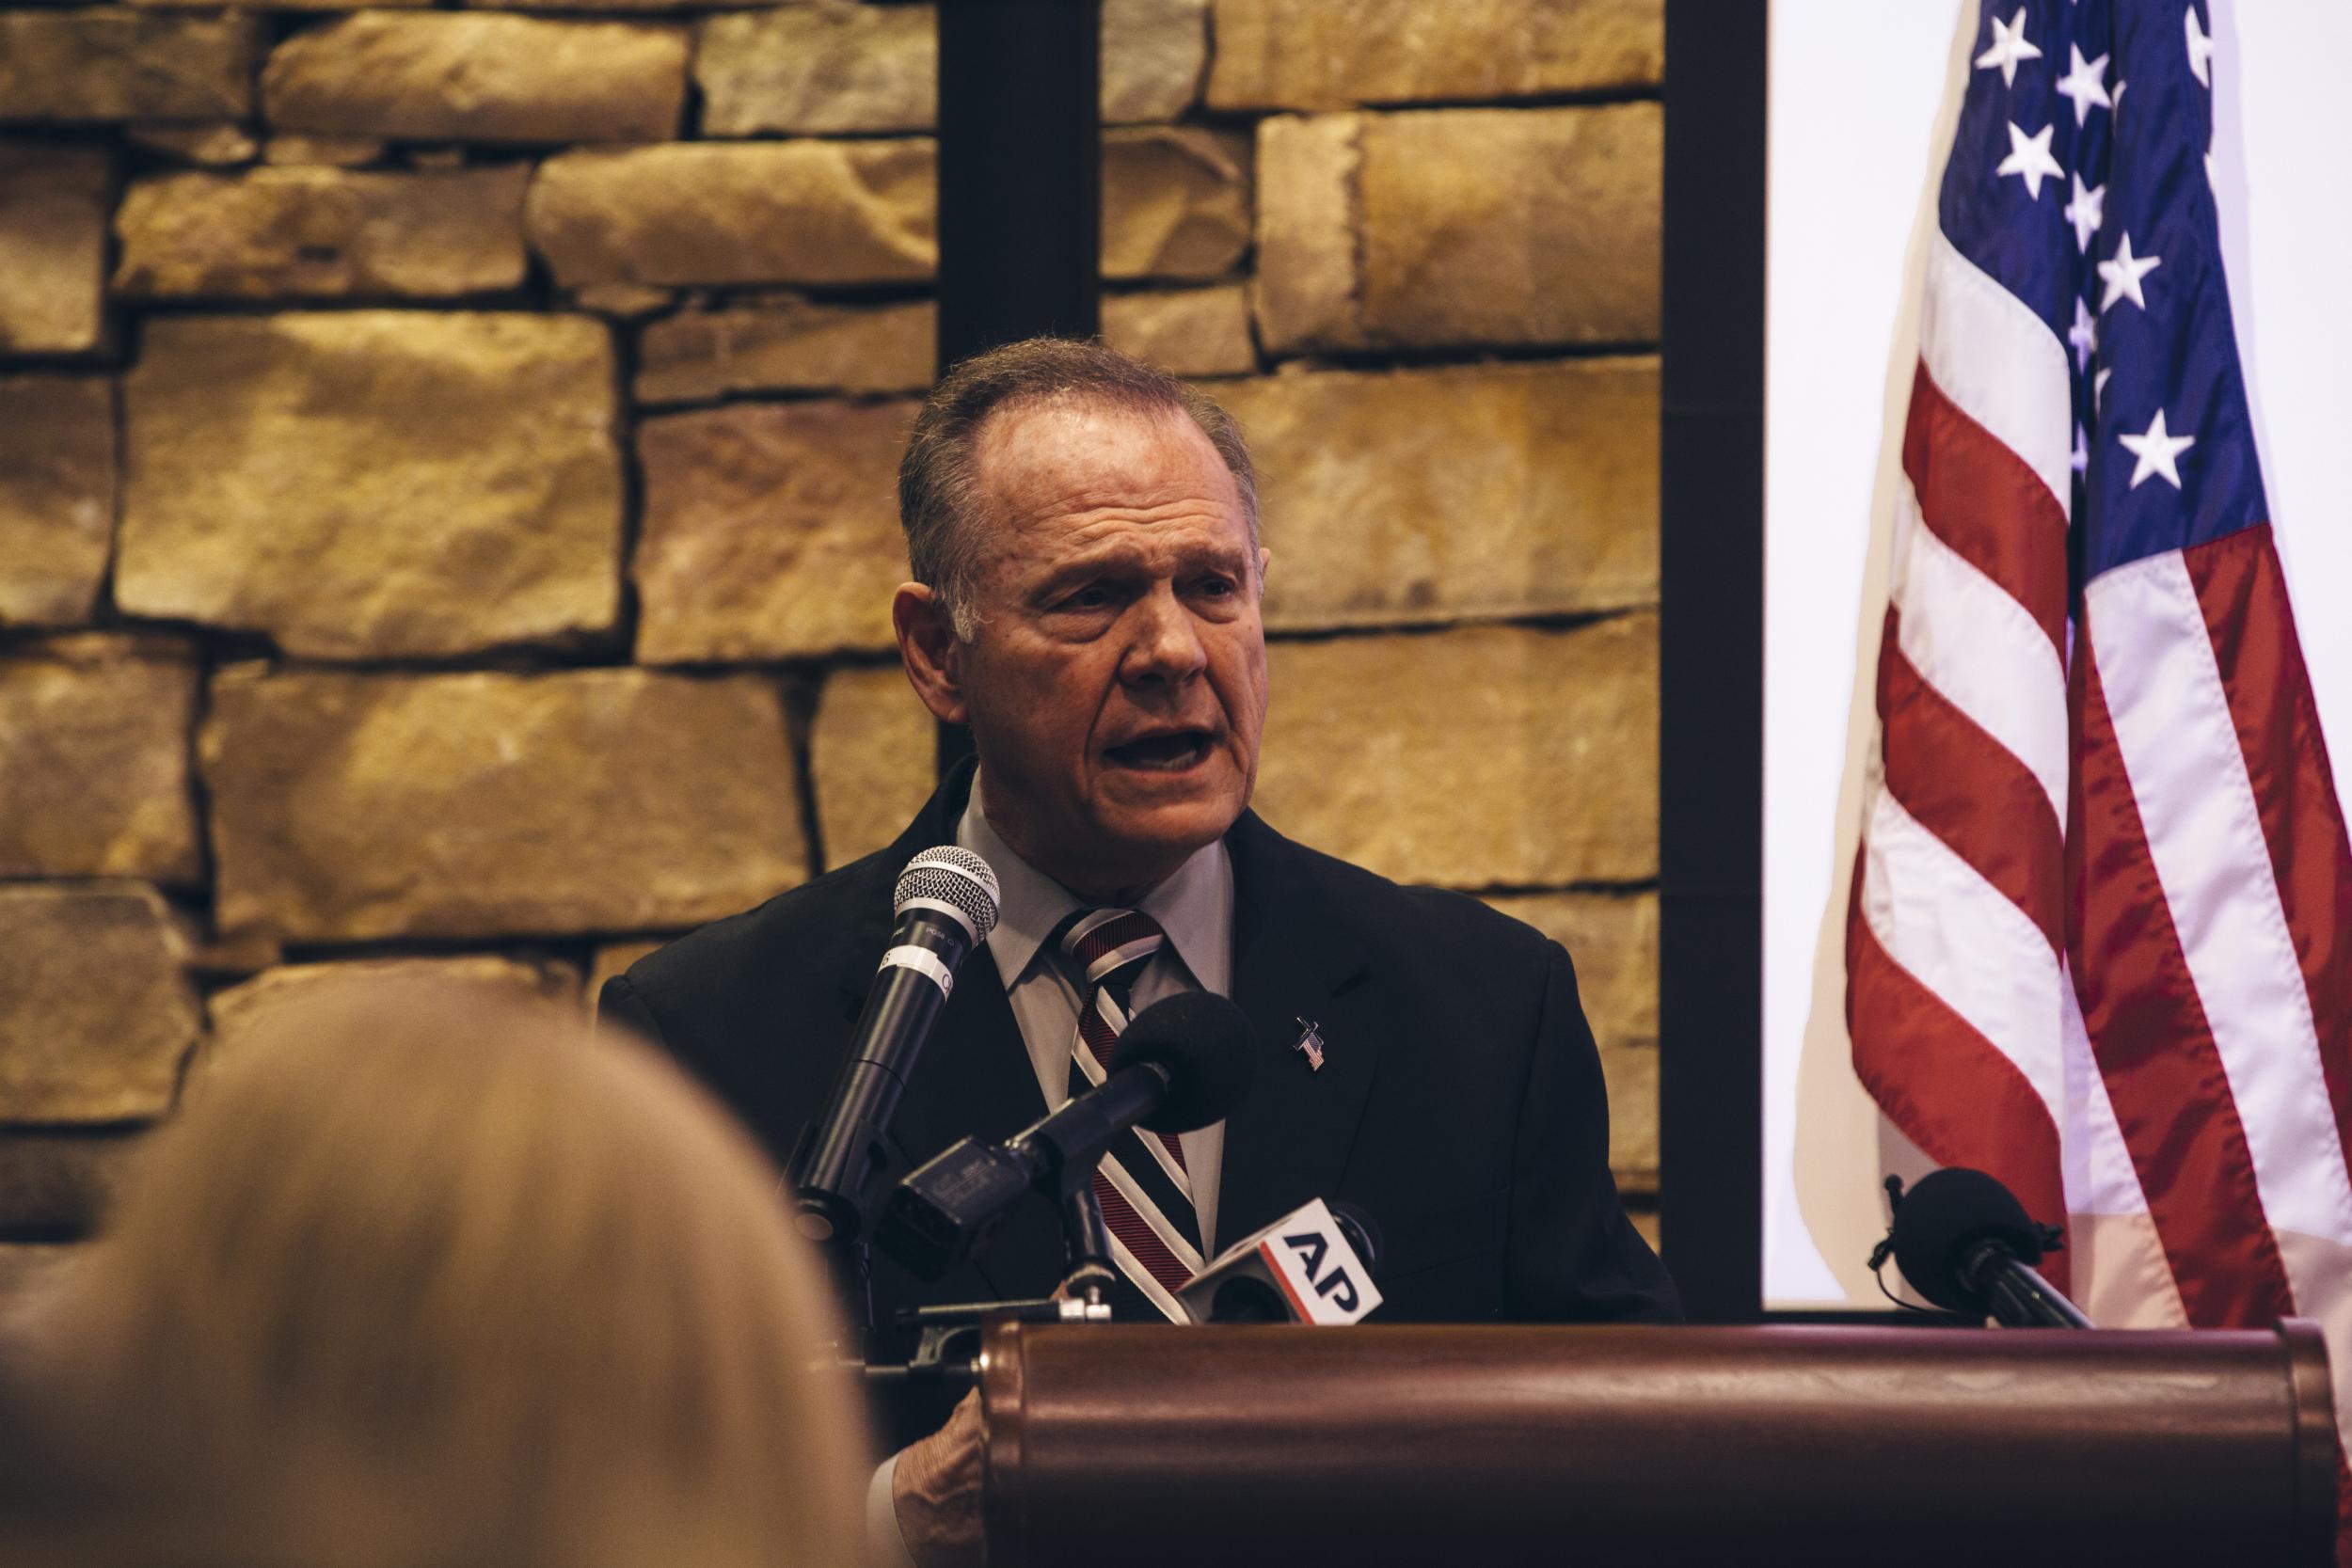 Republican candidate for US Senate Judge Roy Moore speaks during a mid-Alabama Republican Club's Veterans Day event